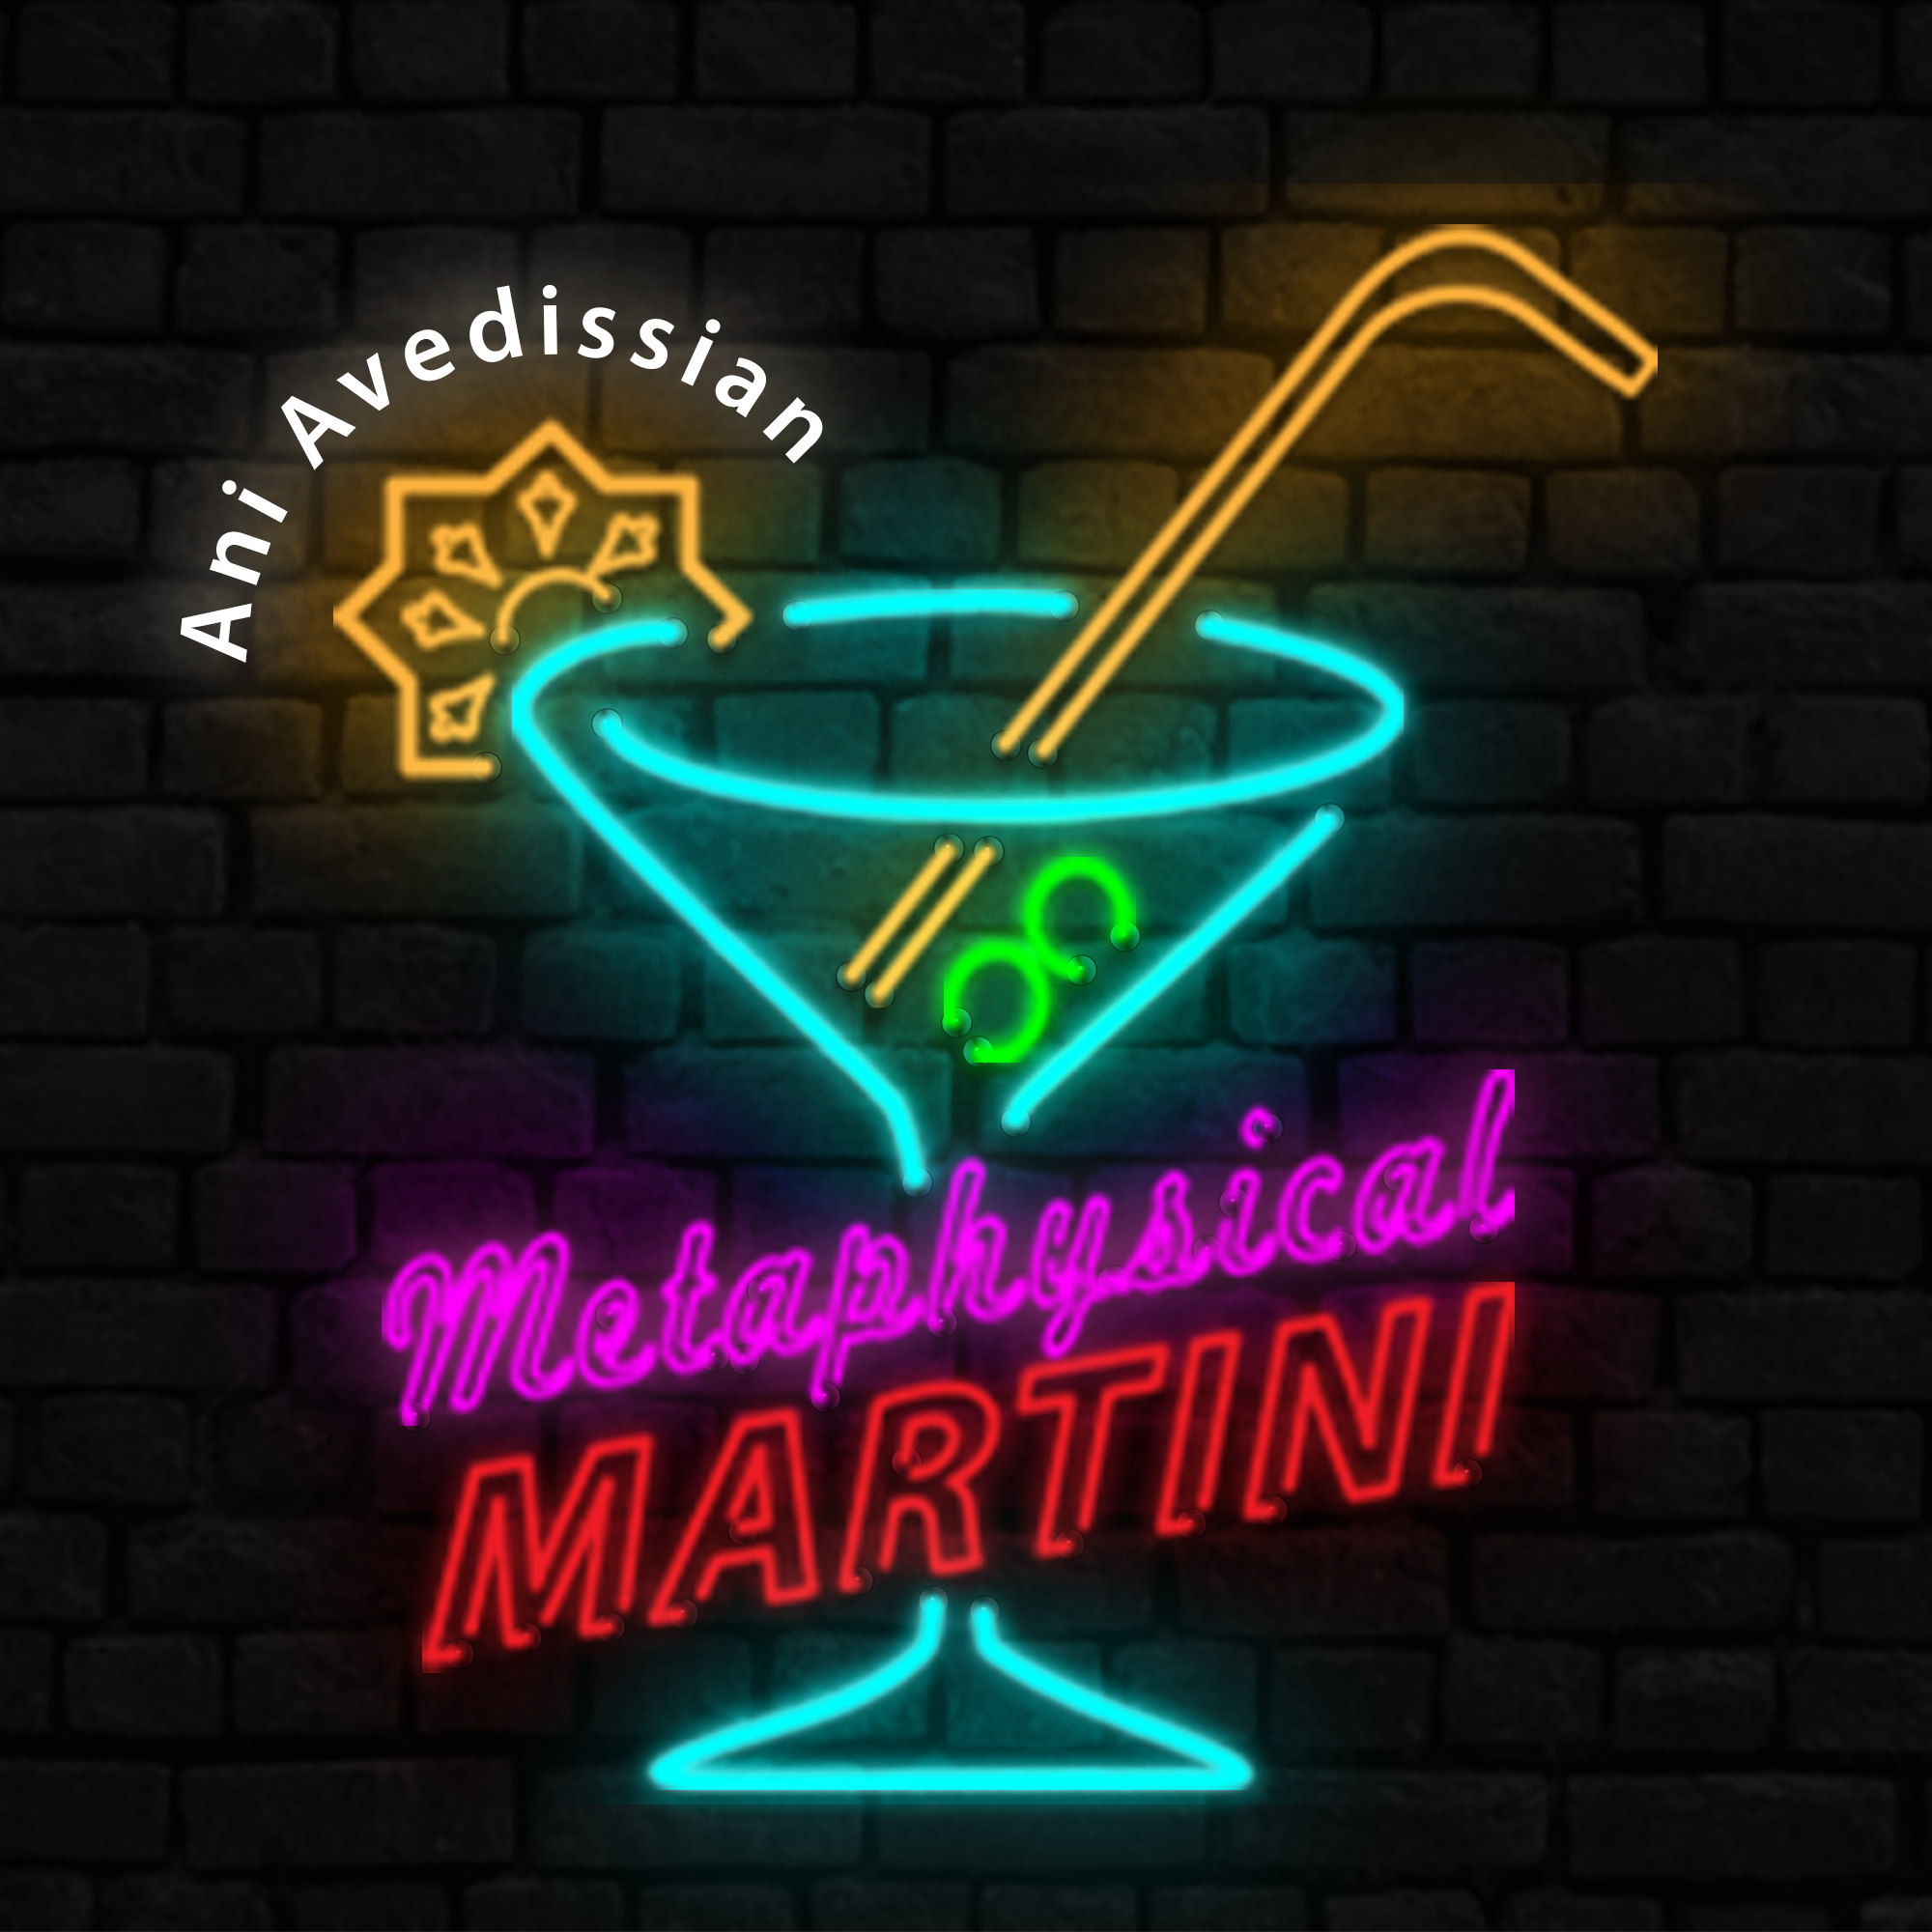 "Metaphysical Martini"  07/24/2019  Ani's second "Martini!"  She is finding her way . . . so far, so good!